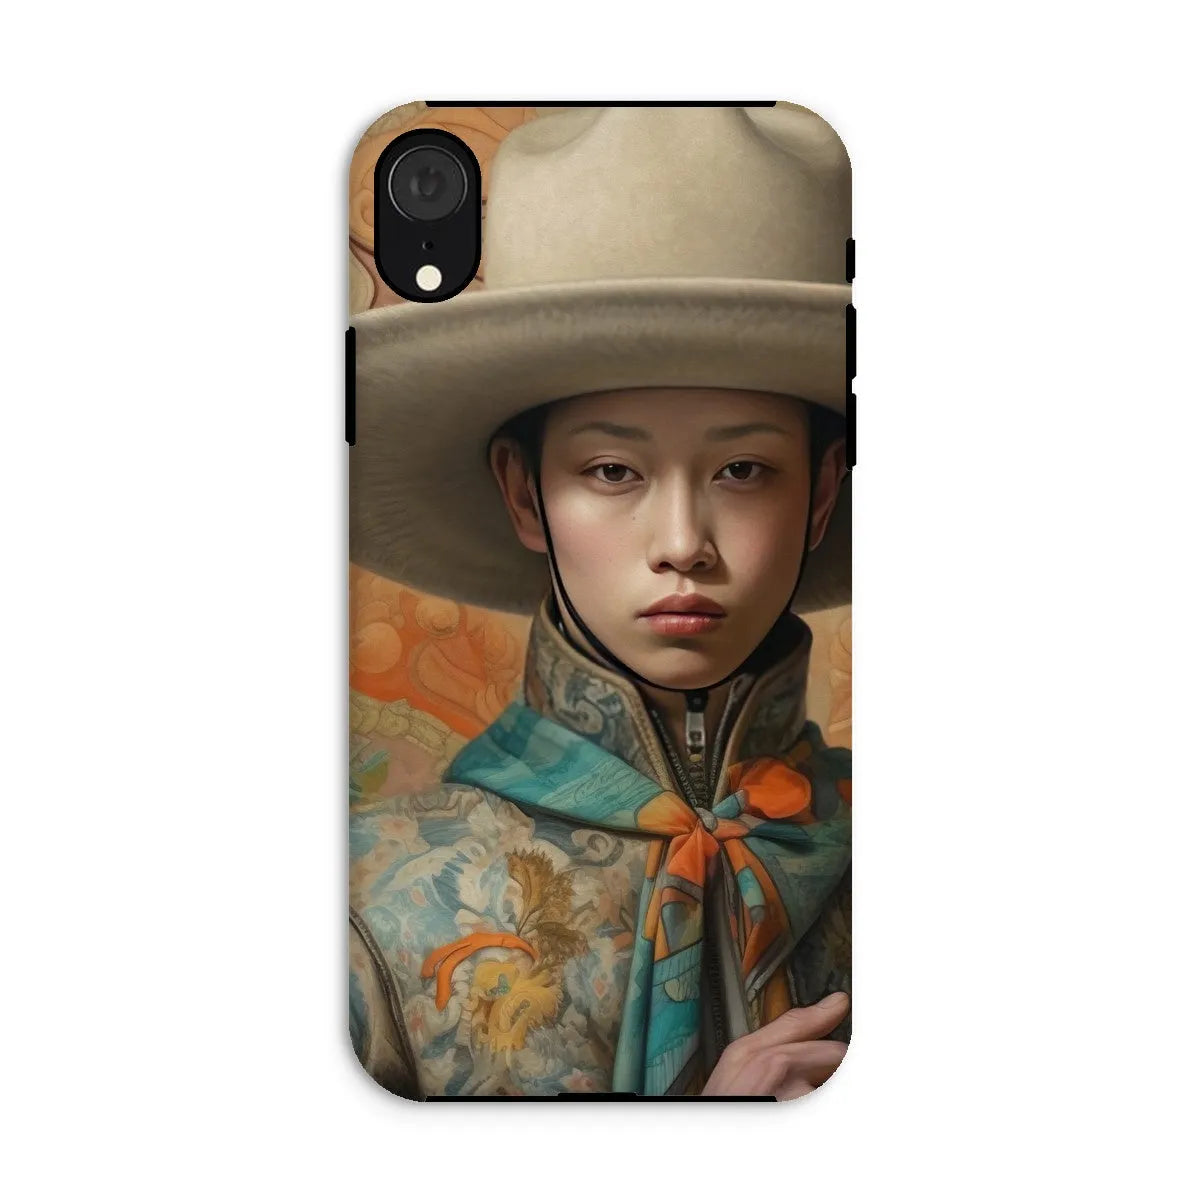 Xiang - Gaysian Chinese Cowboy Aesthetic Art Phone Case - Iphone Xr / Matte - Mobile Phone Cases - Aesthetic Art